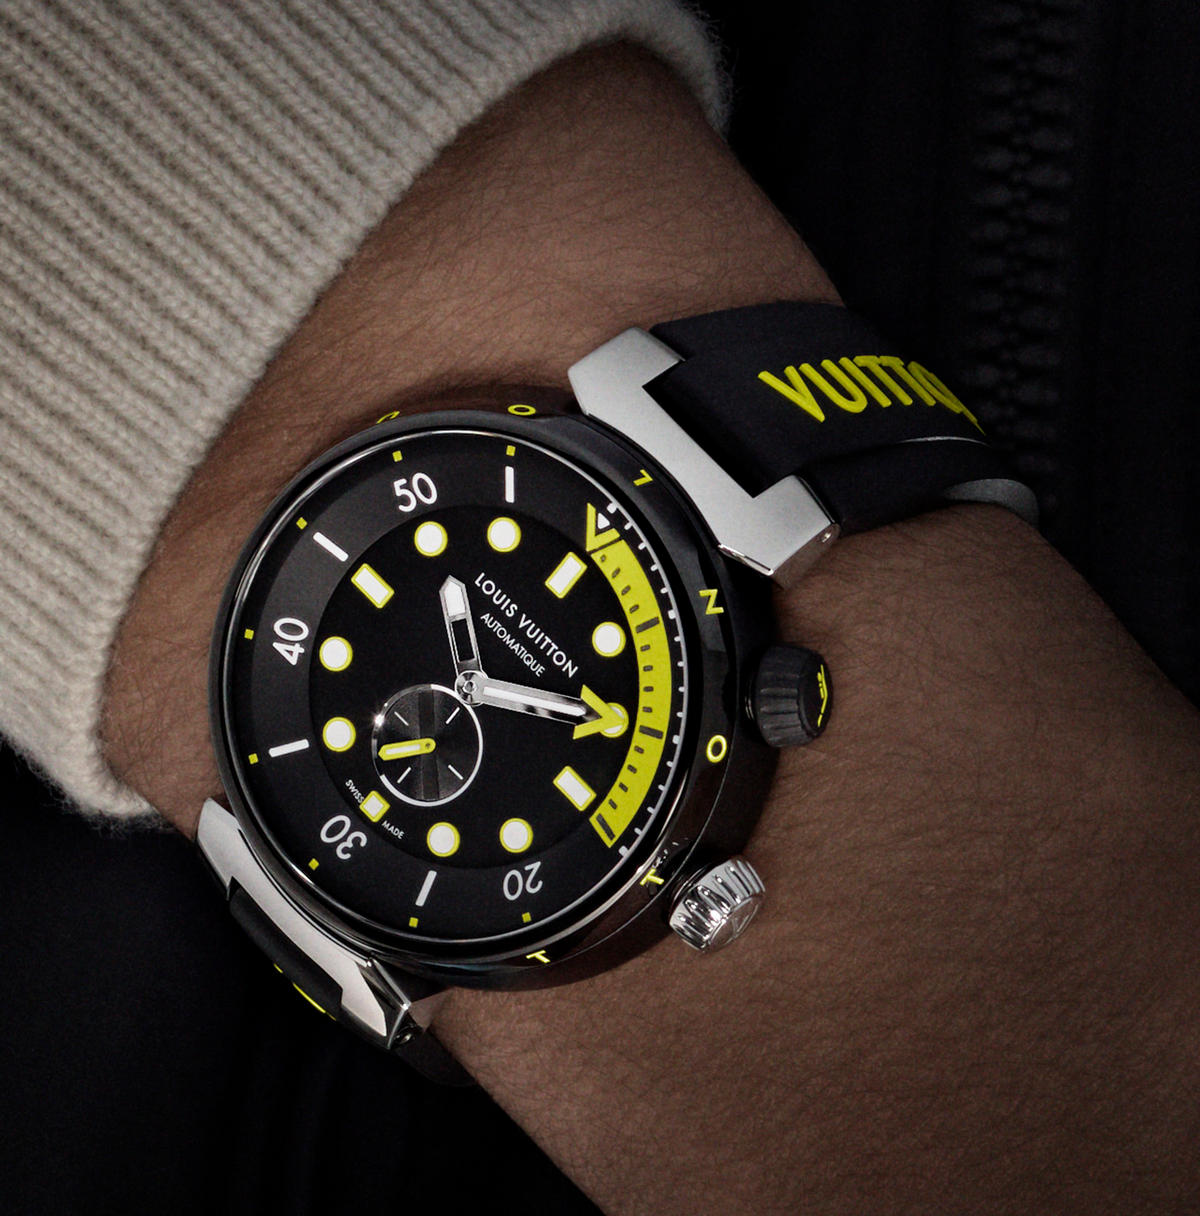 Louis Vuitton reimagines the traditional dive watch design with